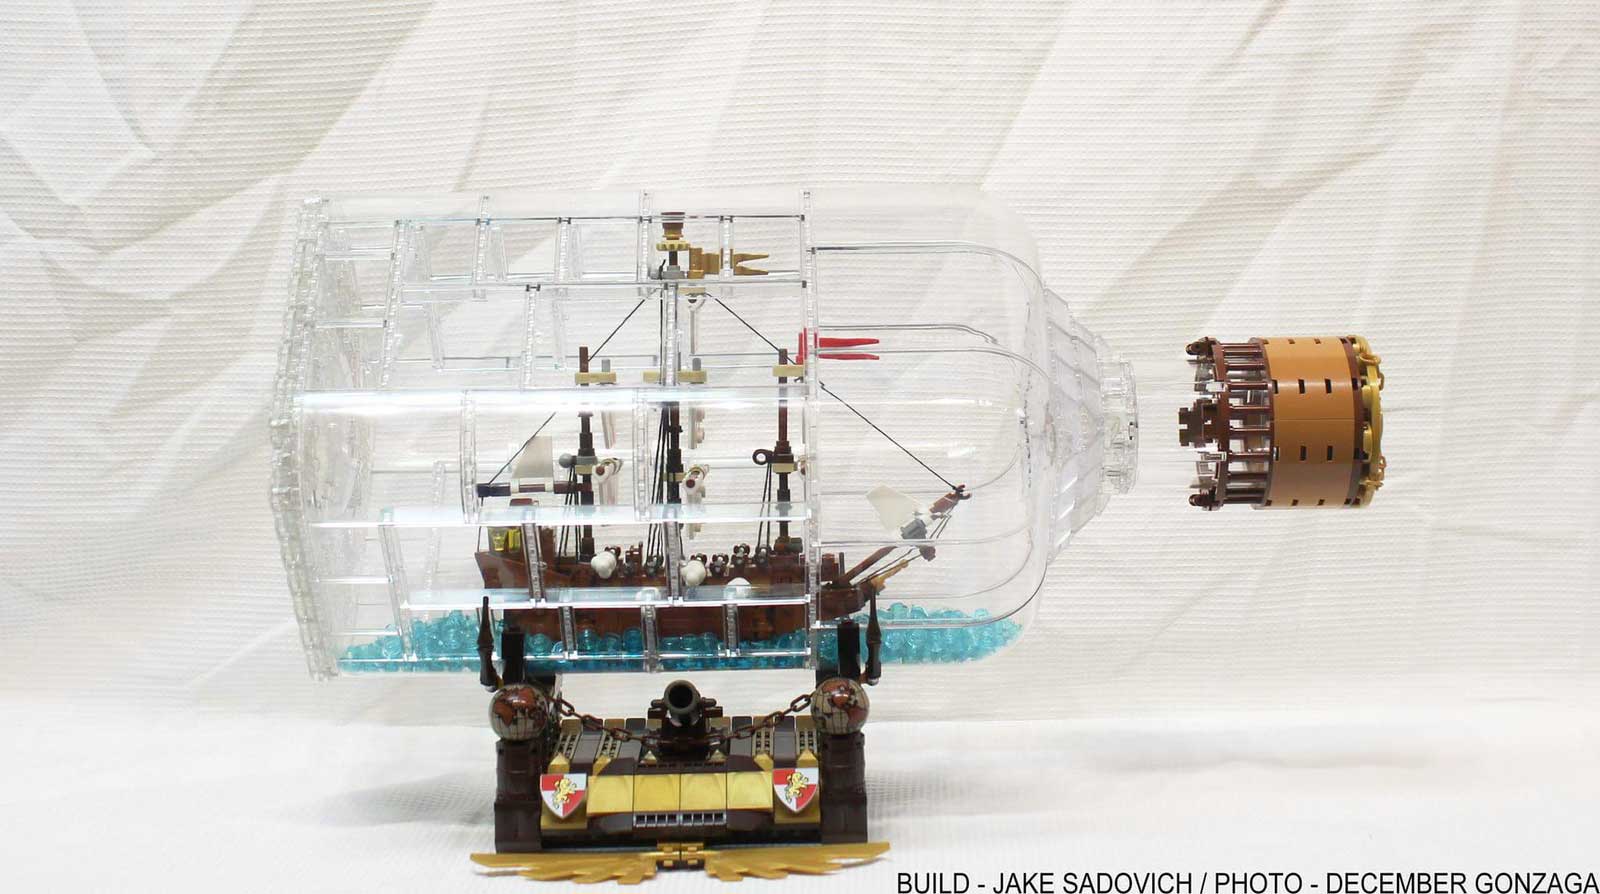 LEGO Ideas ship in a bottle - Leviathan